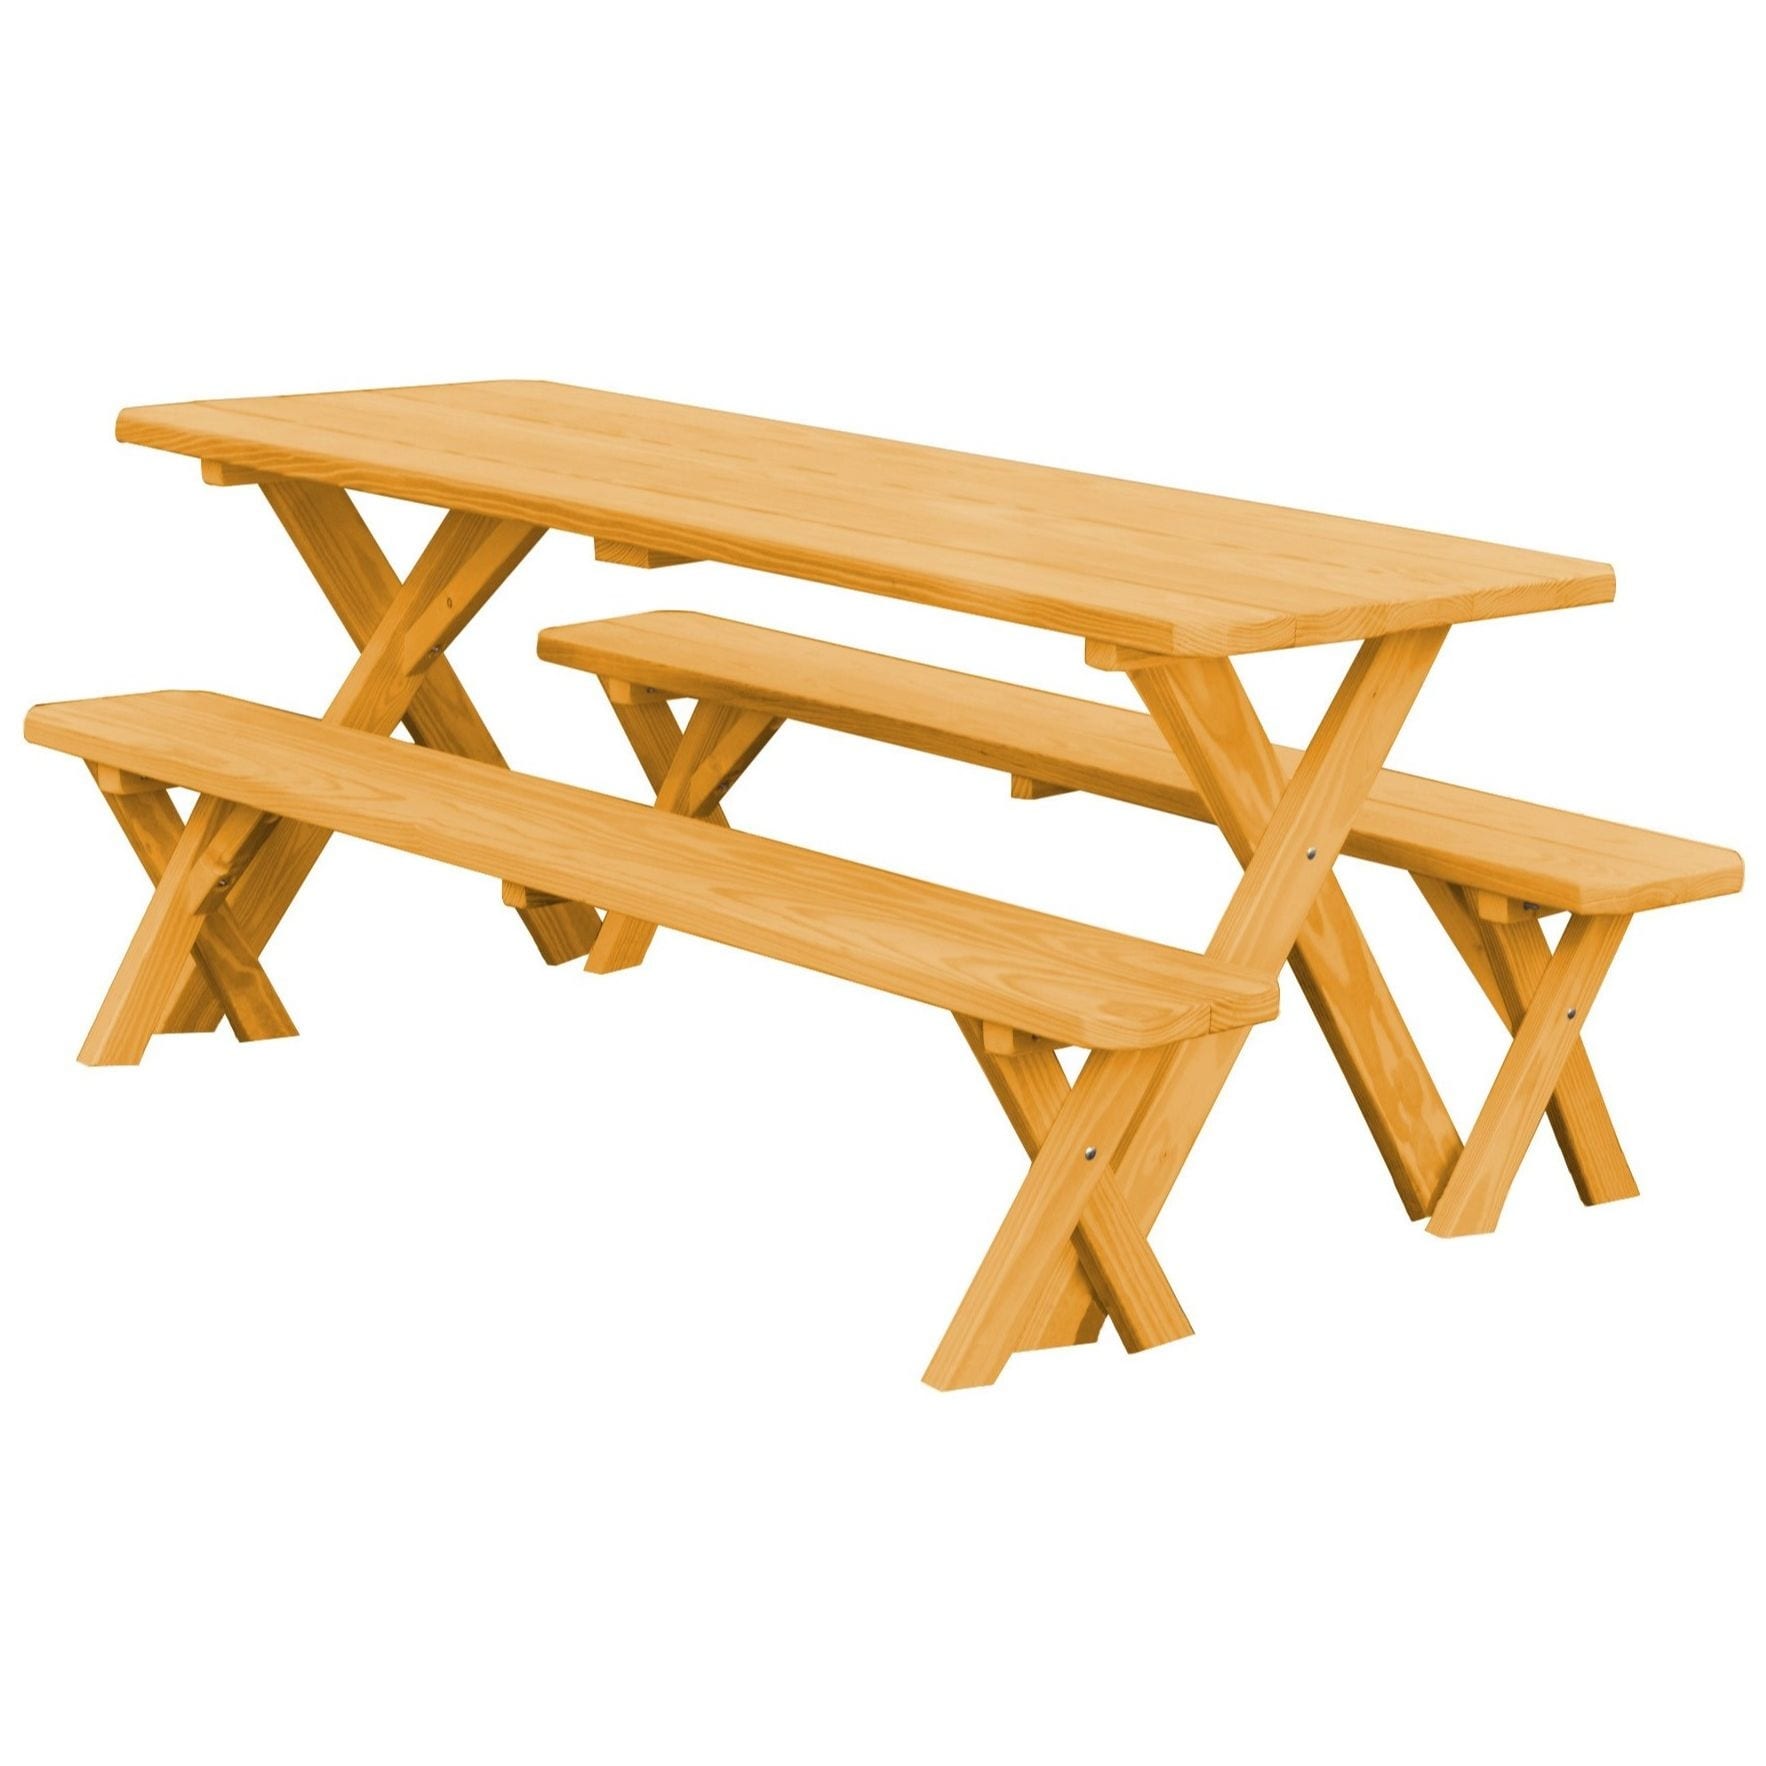 Pine 6 Cross-leg Picnic Table With 2 Benches